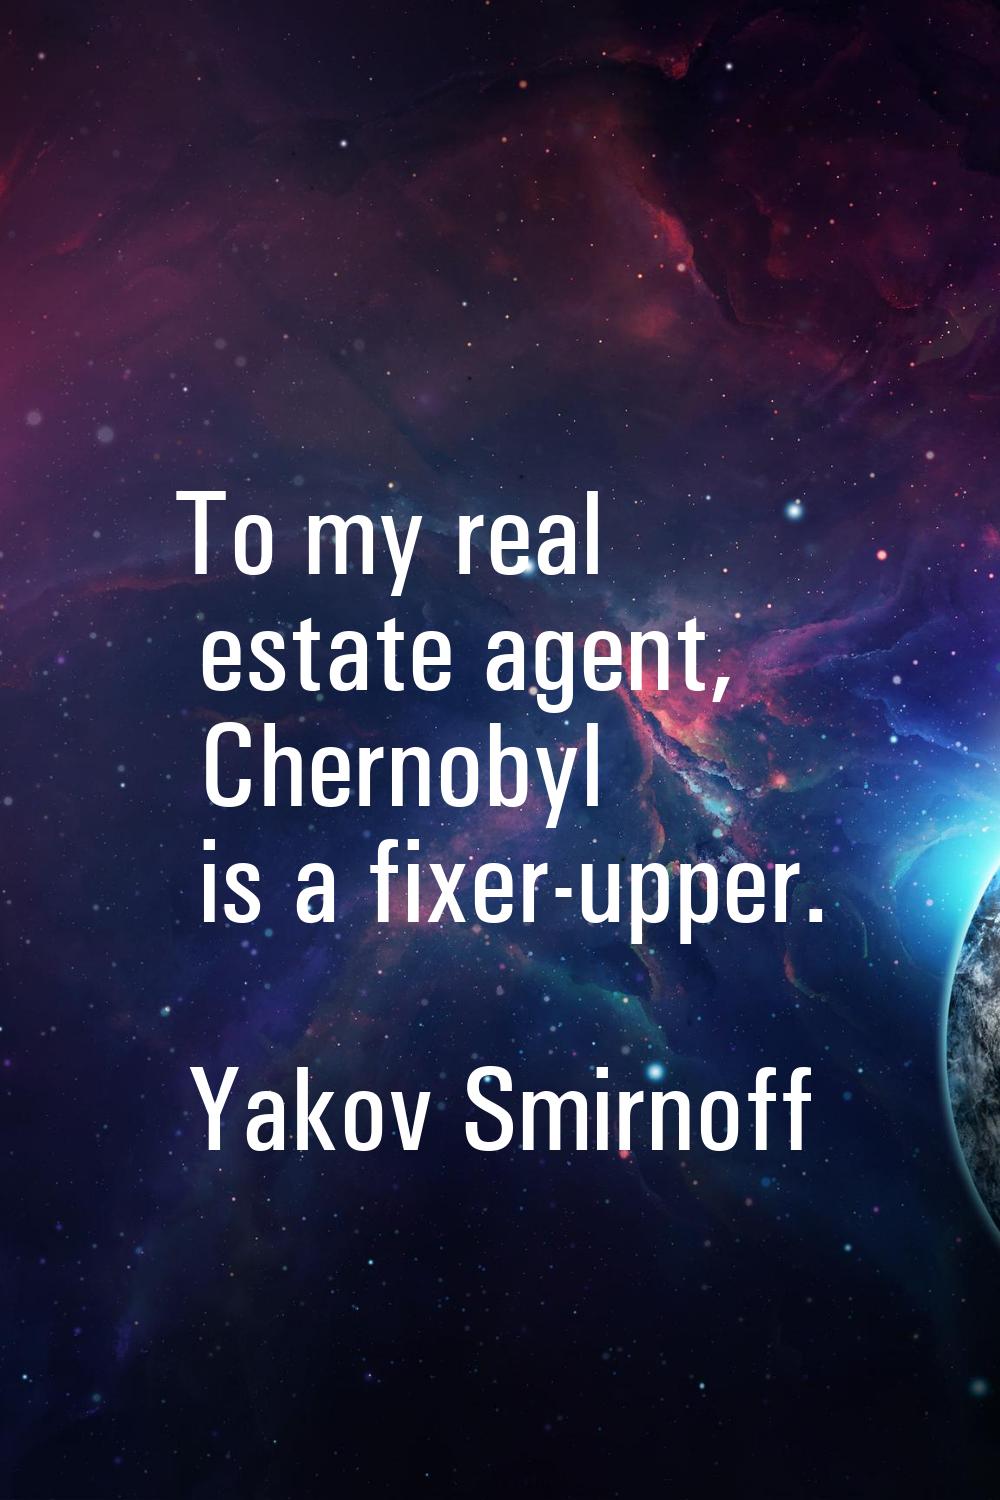 To my real estate agent, Chernobyl is a fixer-upper.